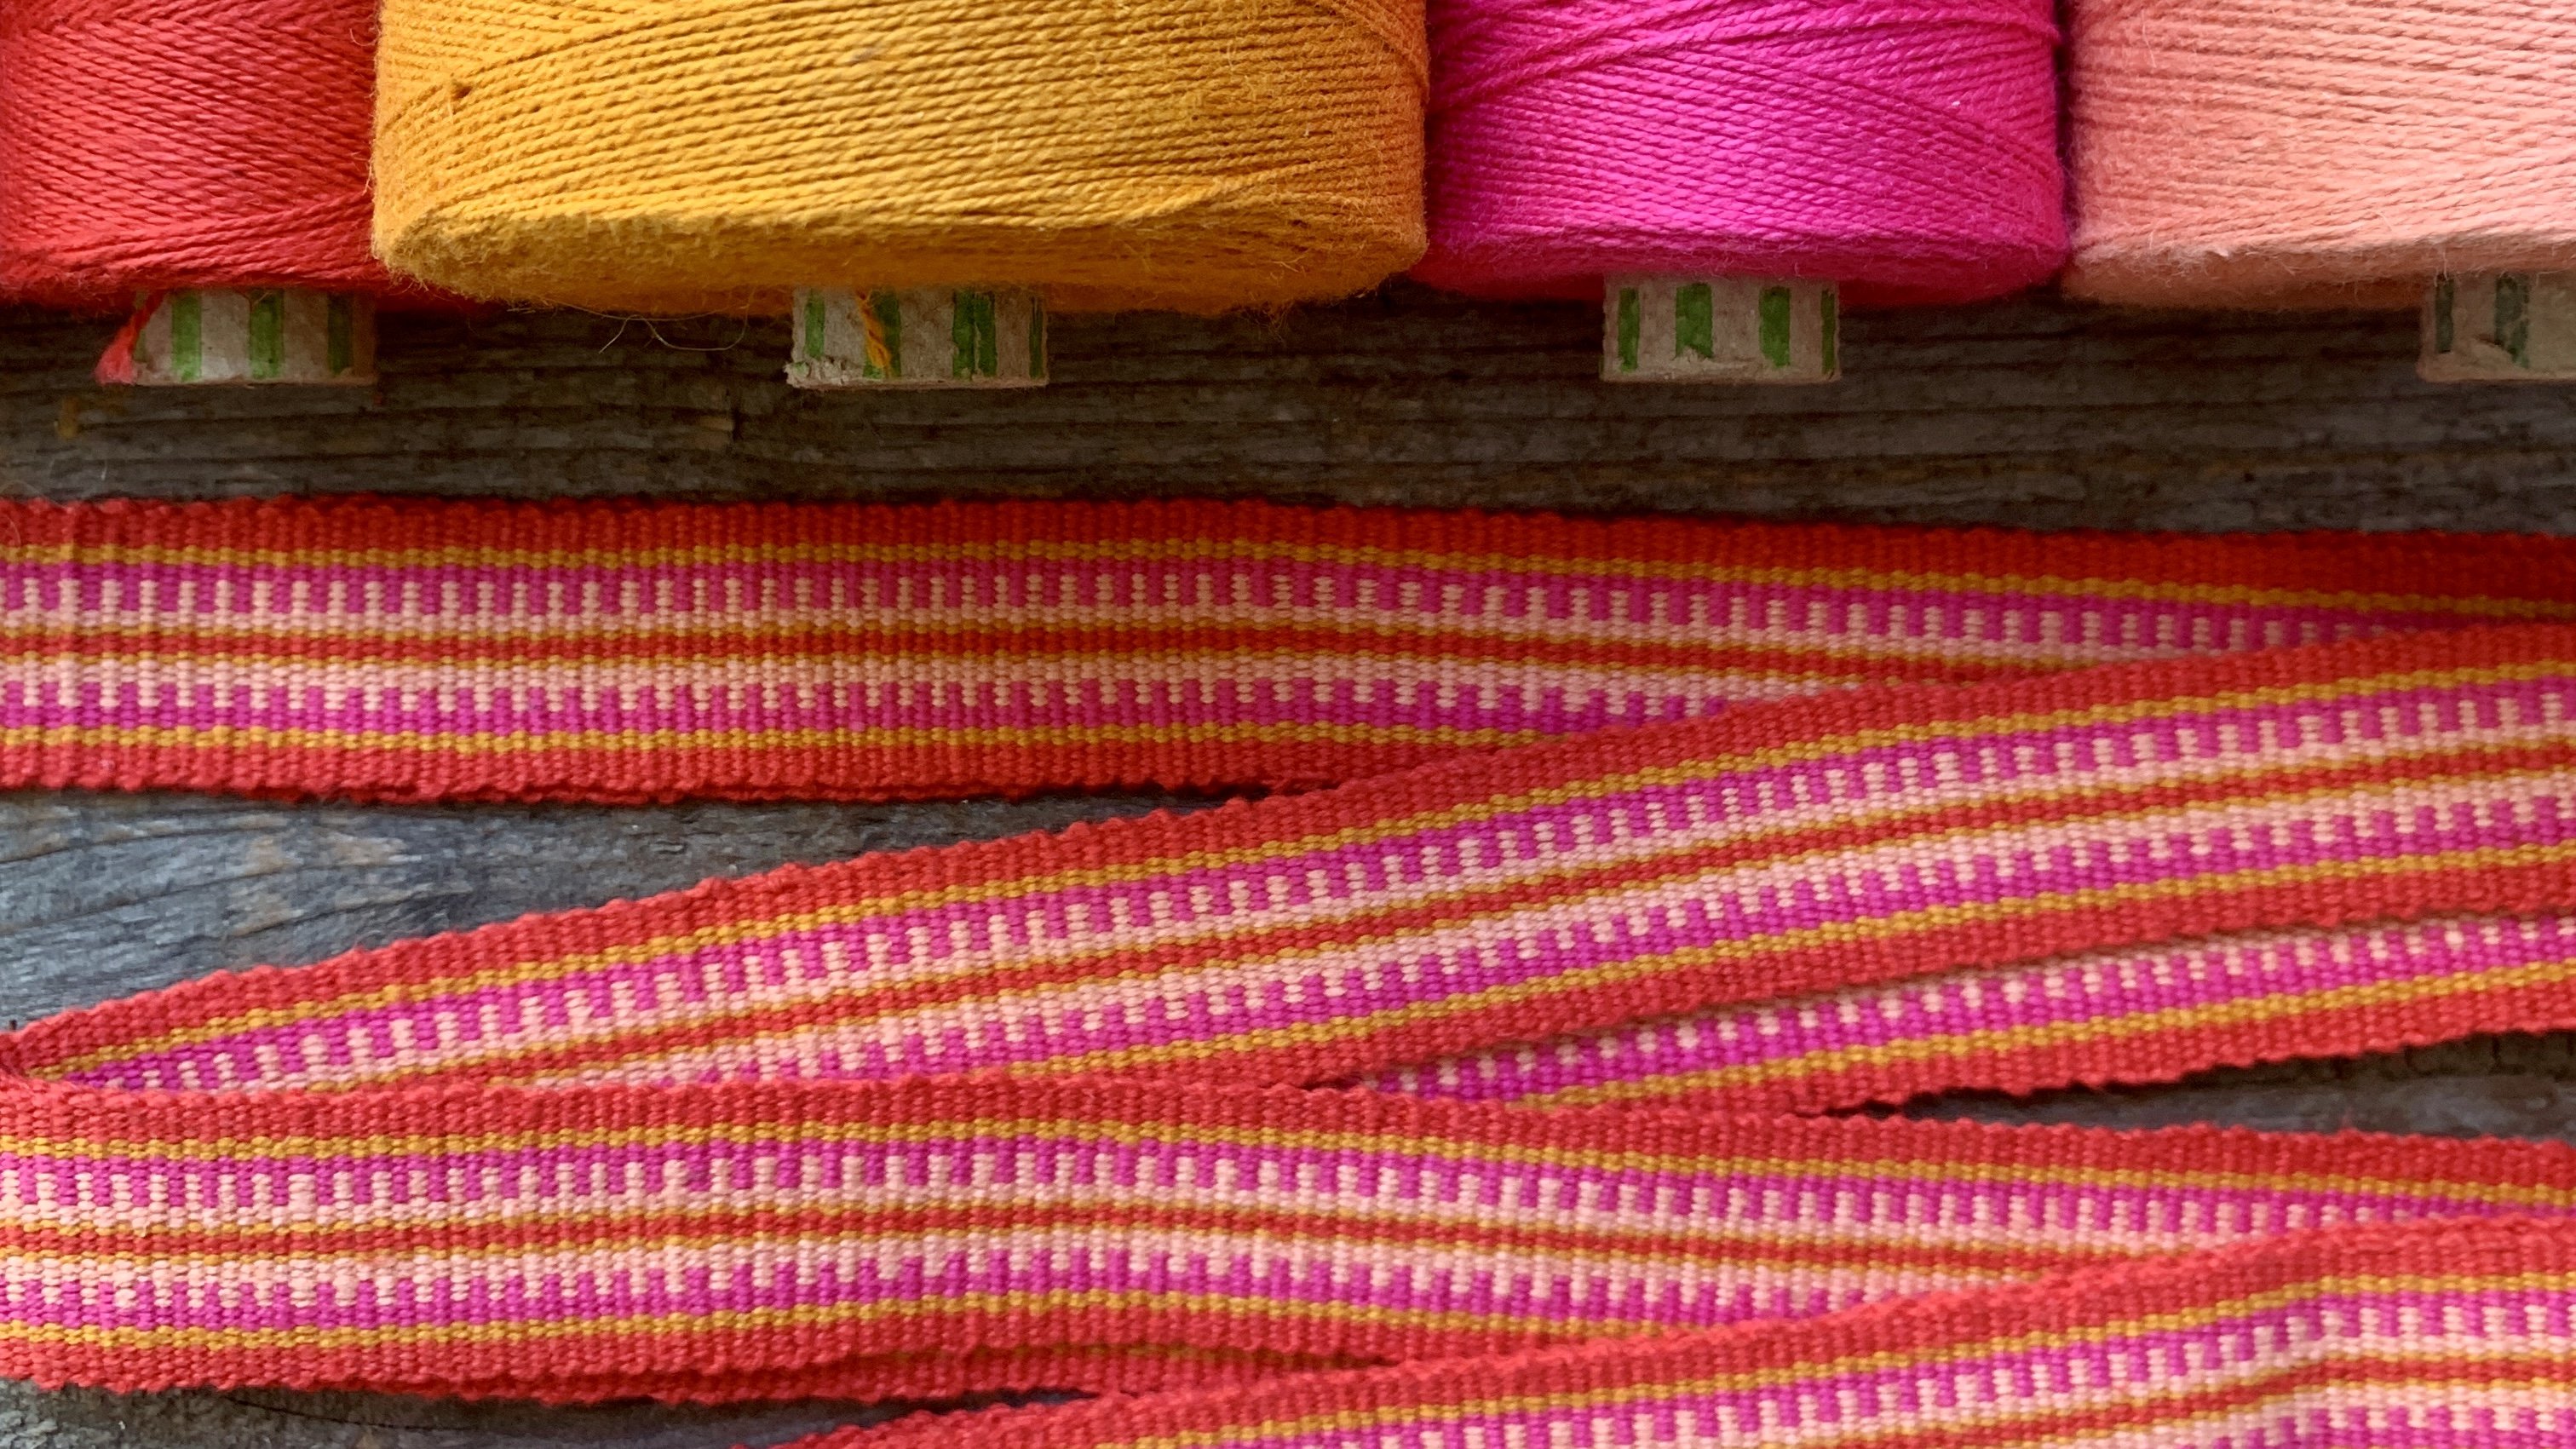 Introduction to Inkle Loom Weaving